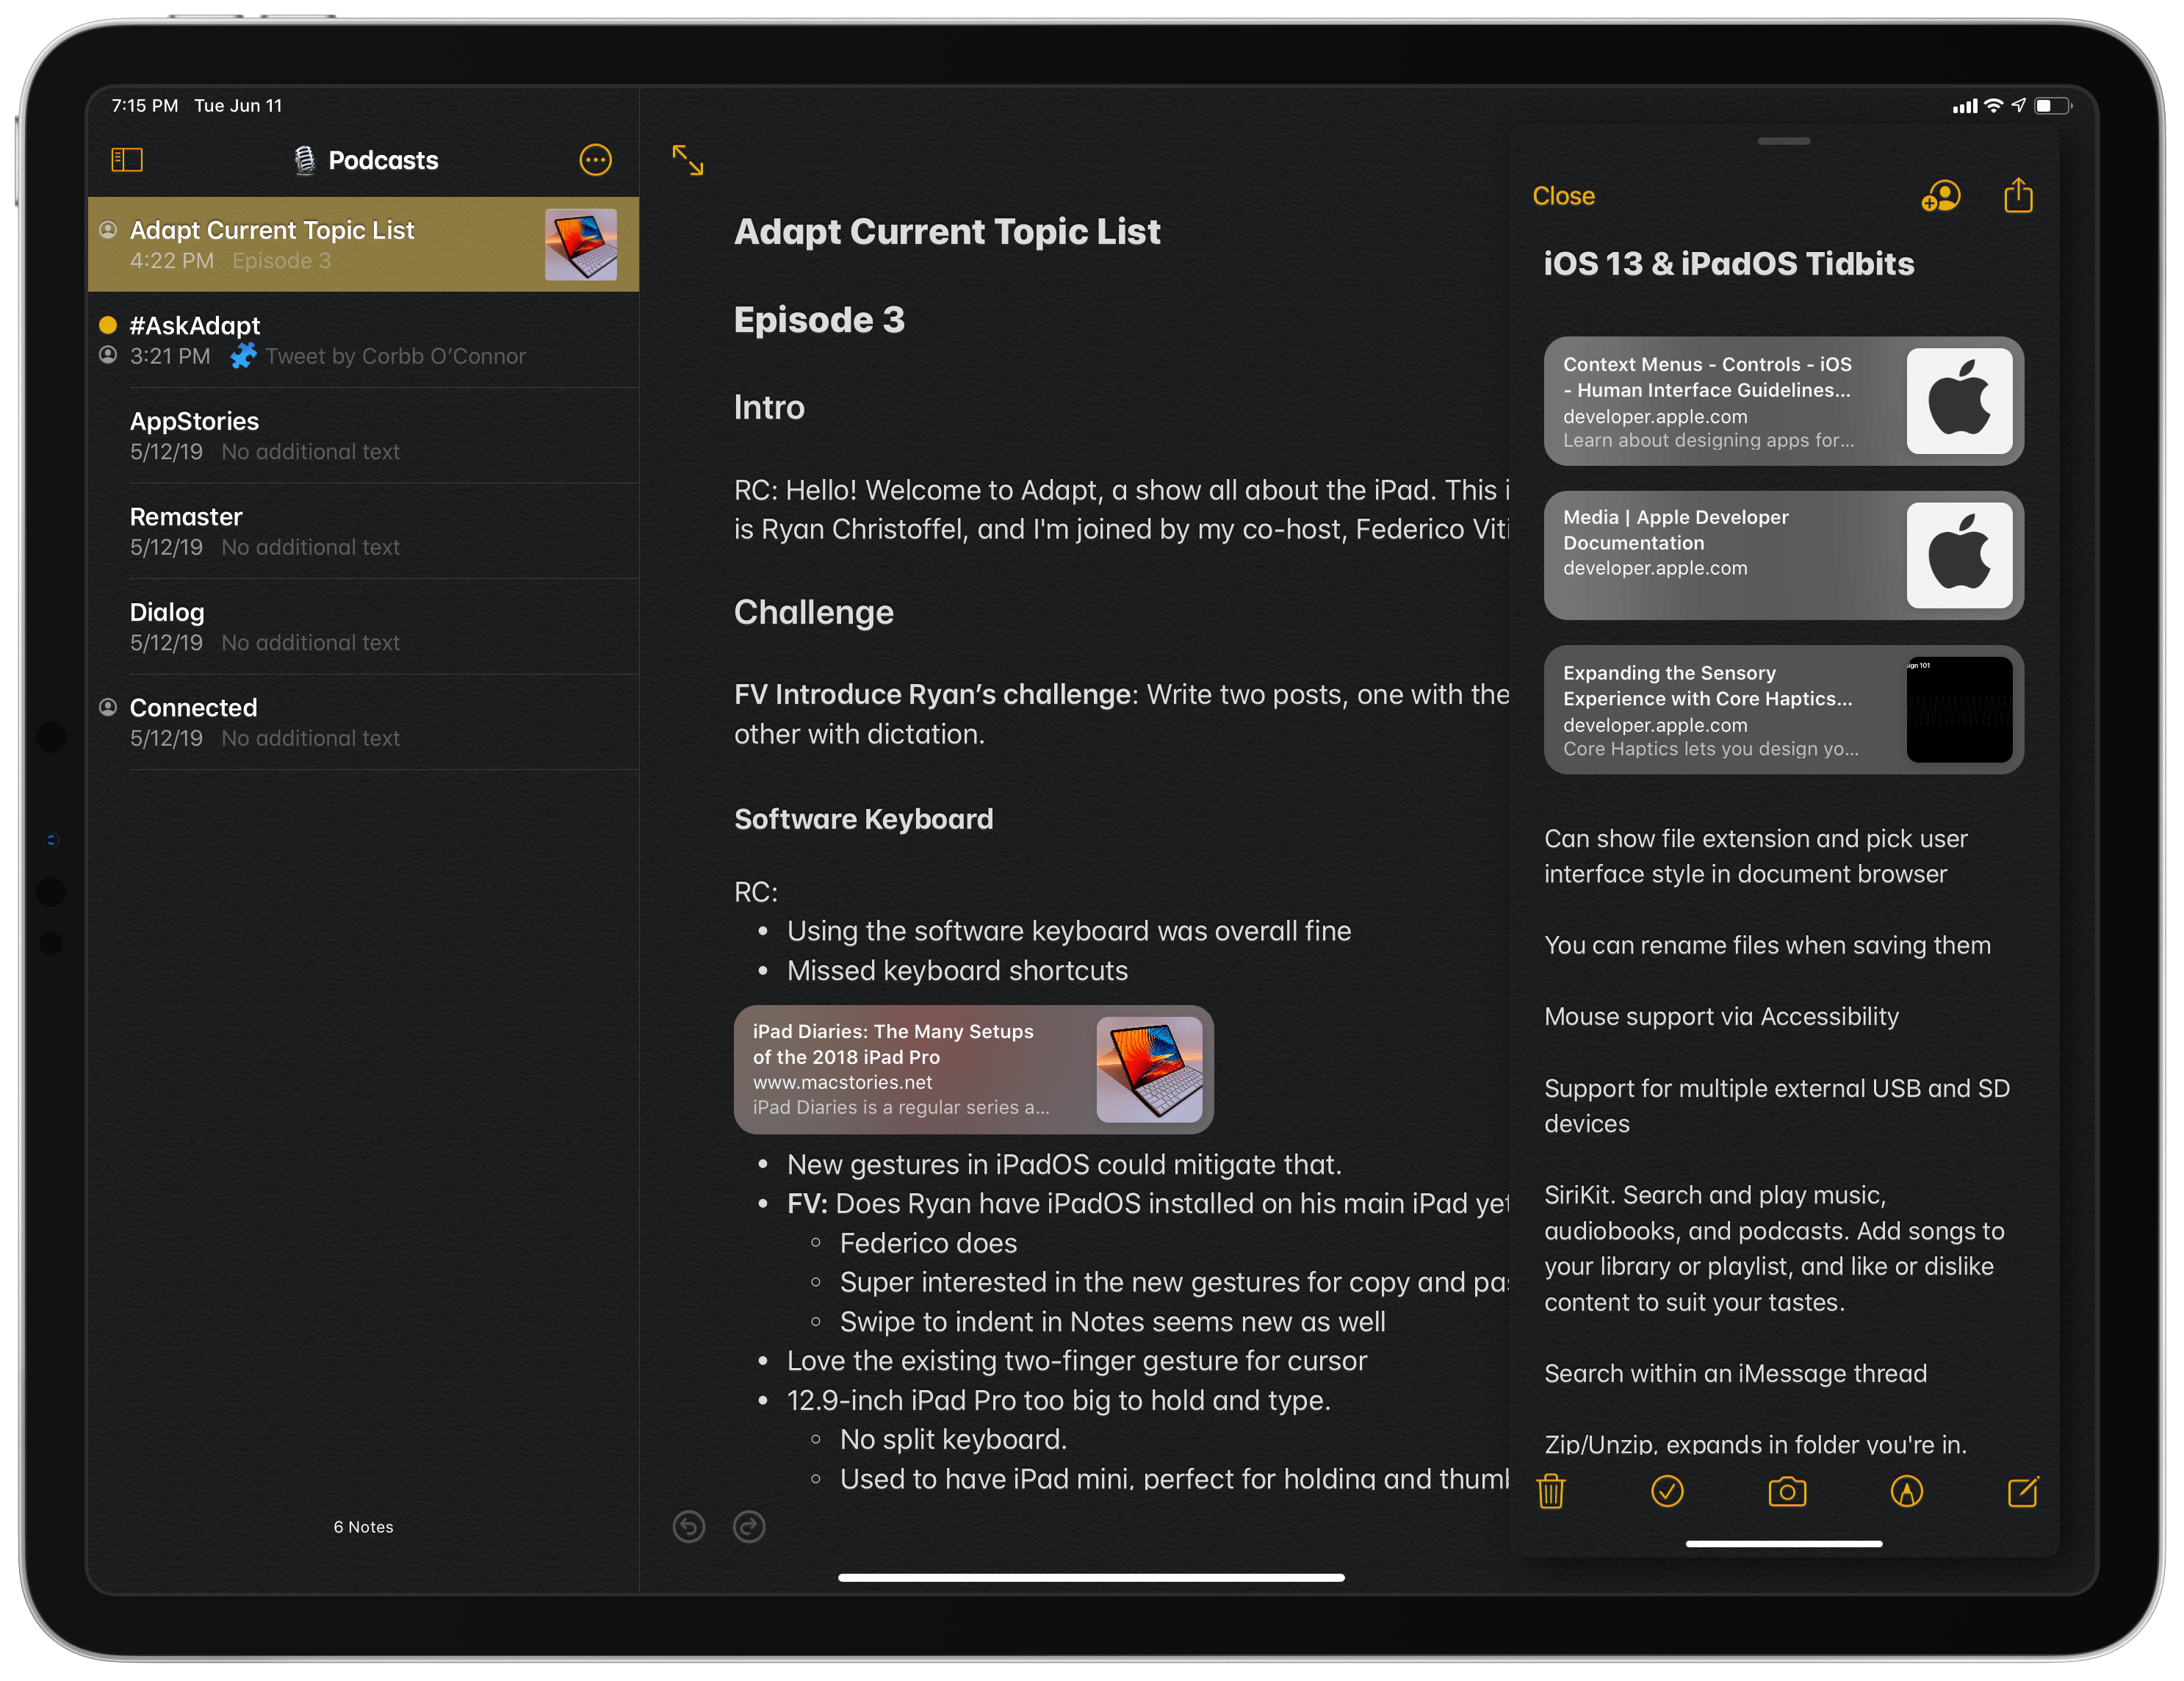 Two windows from Notes – one in full-screen, the other in Slide Over with dark mode enabled.